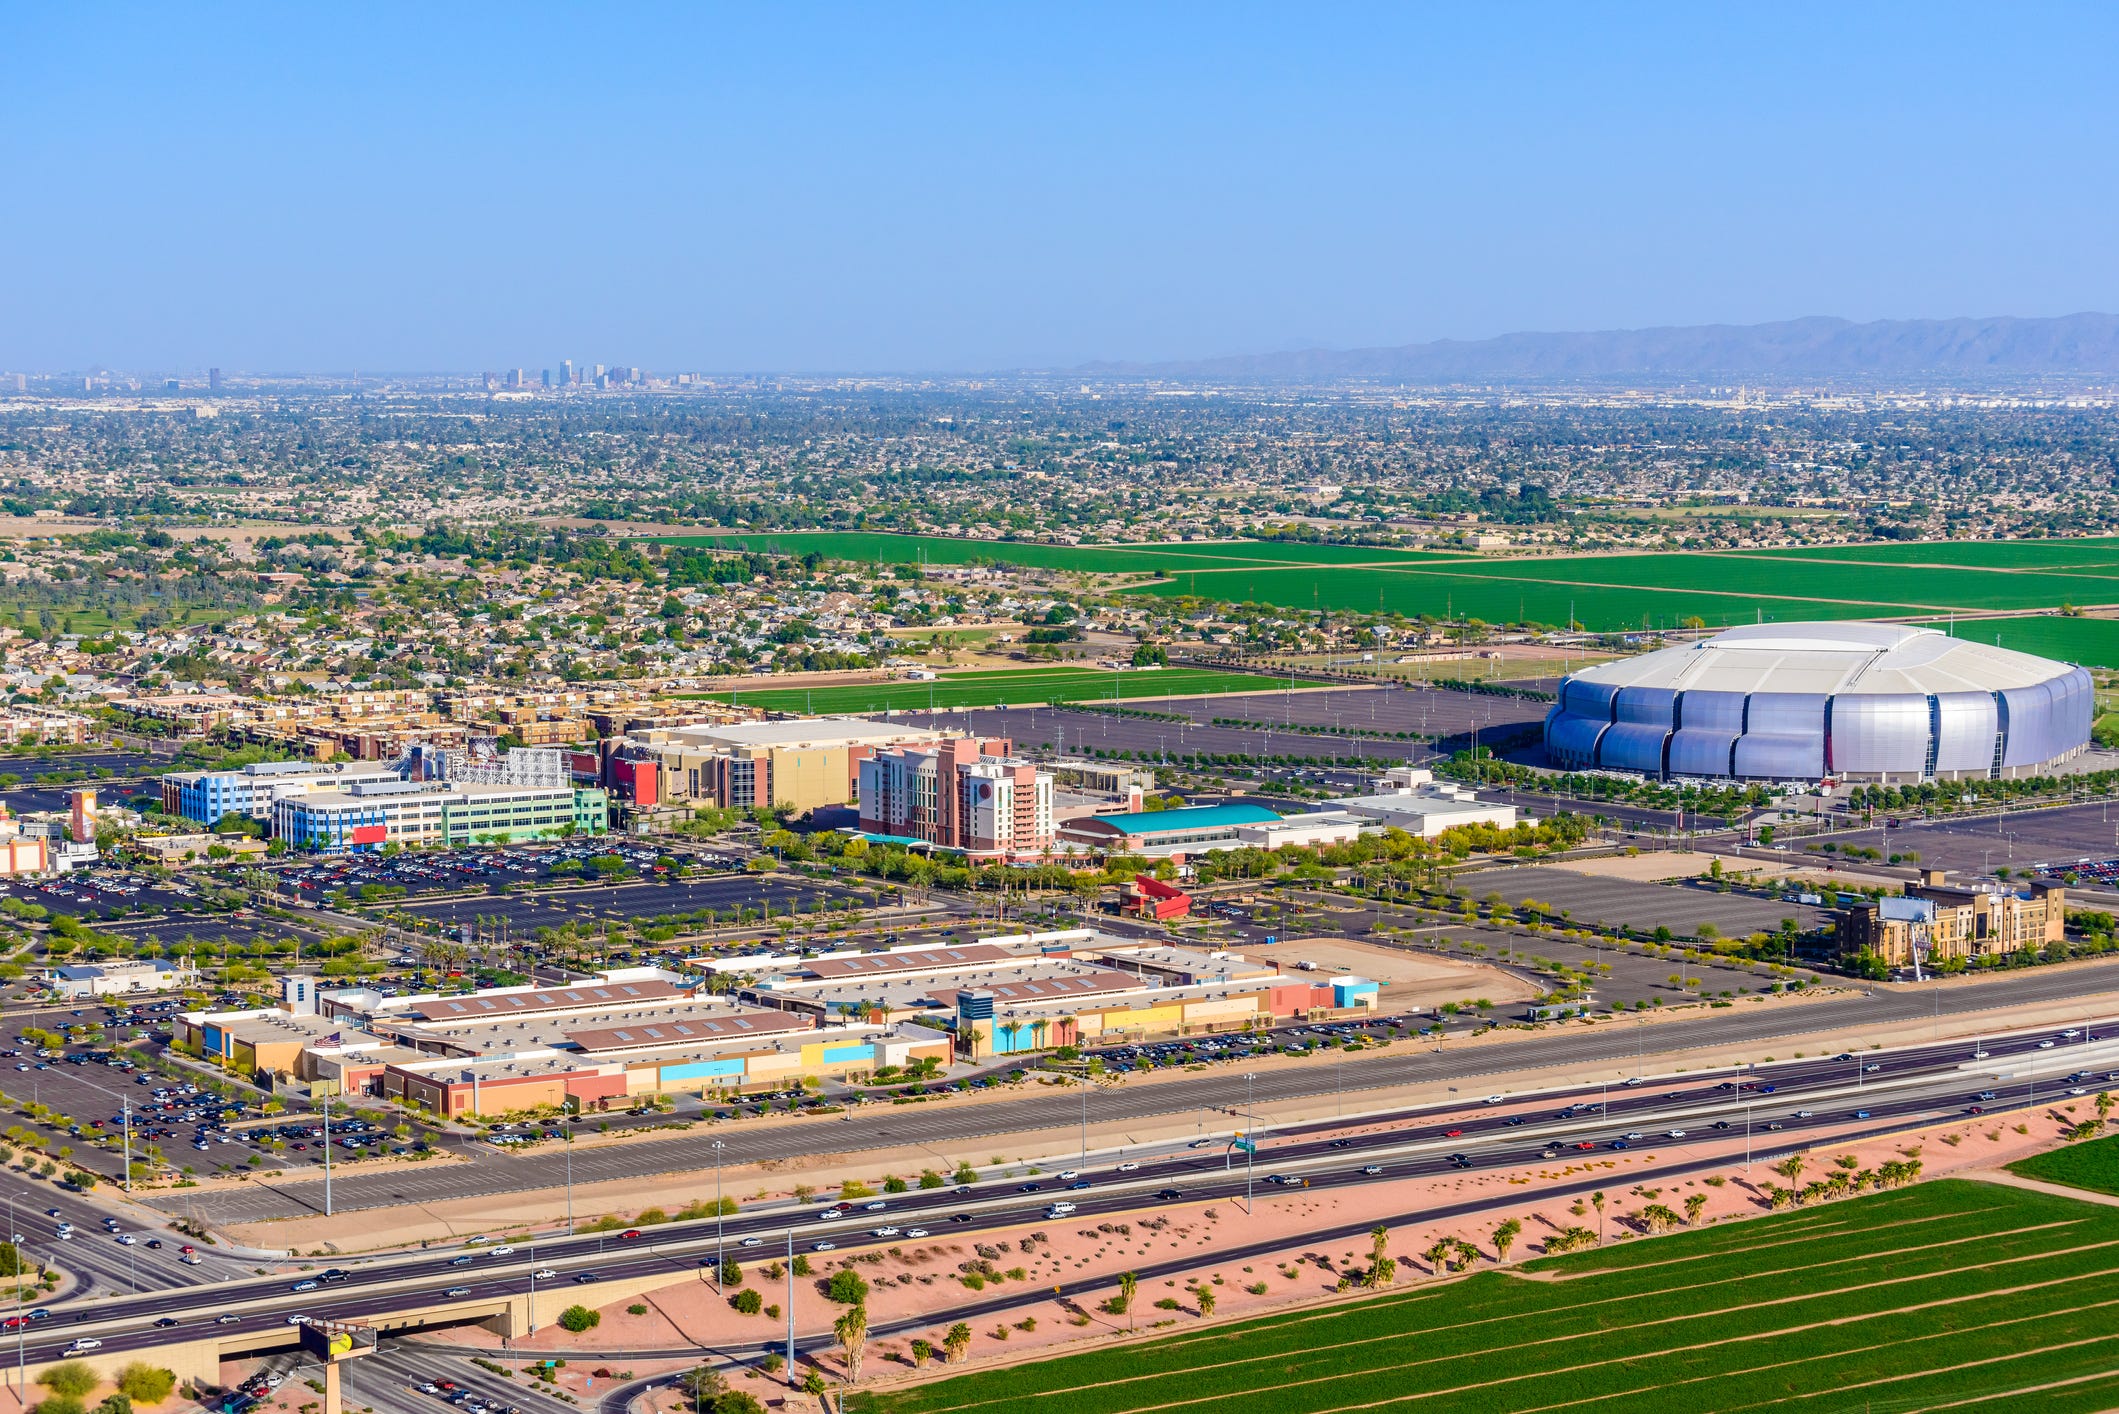 Glendale, Arizona: Your Ultimate Stop for Sports, Dining, and Entertainment